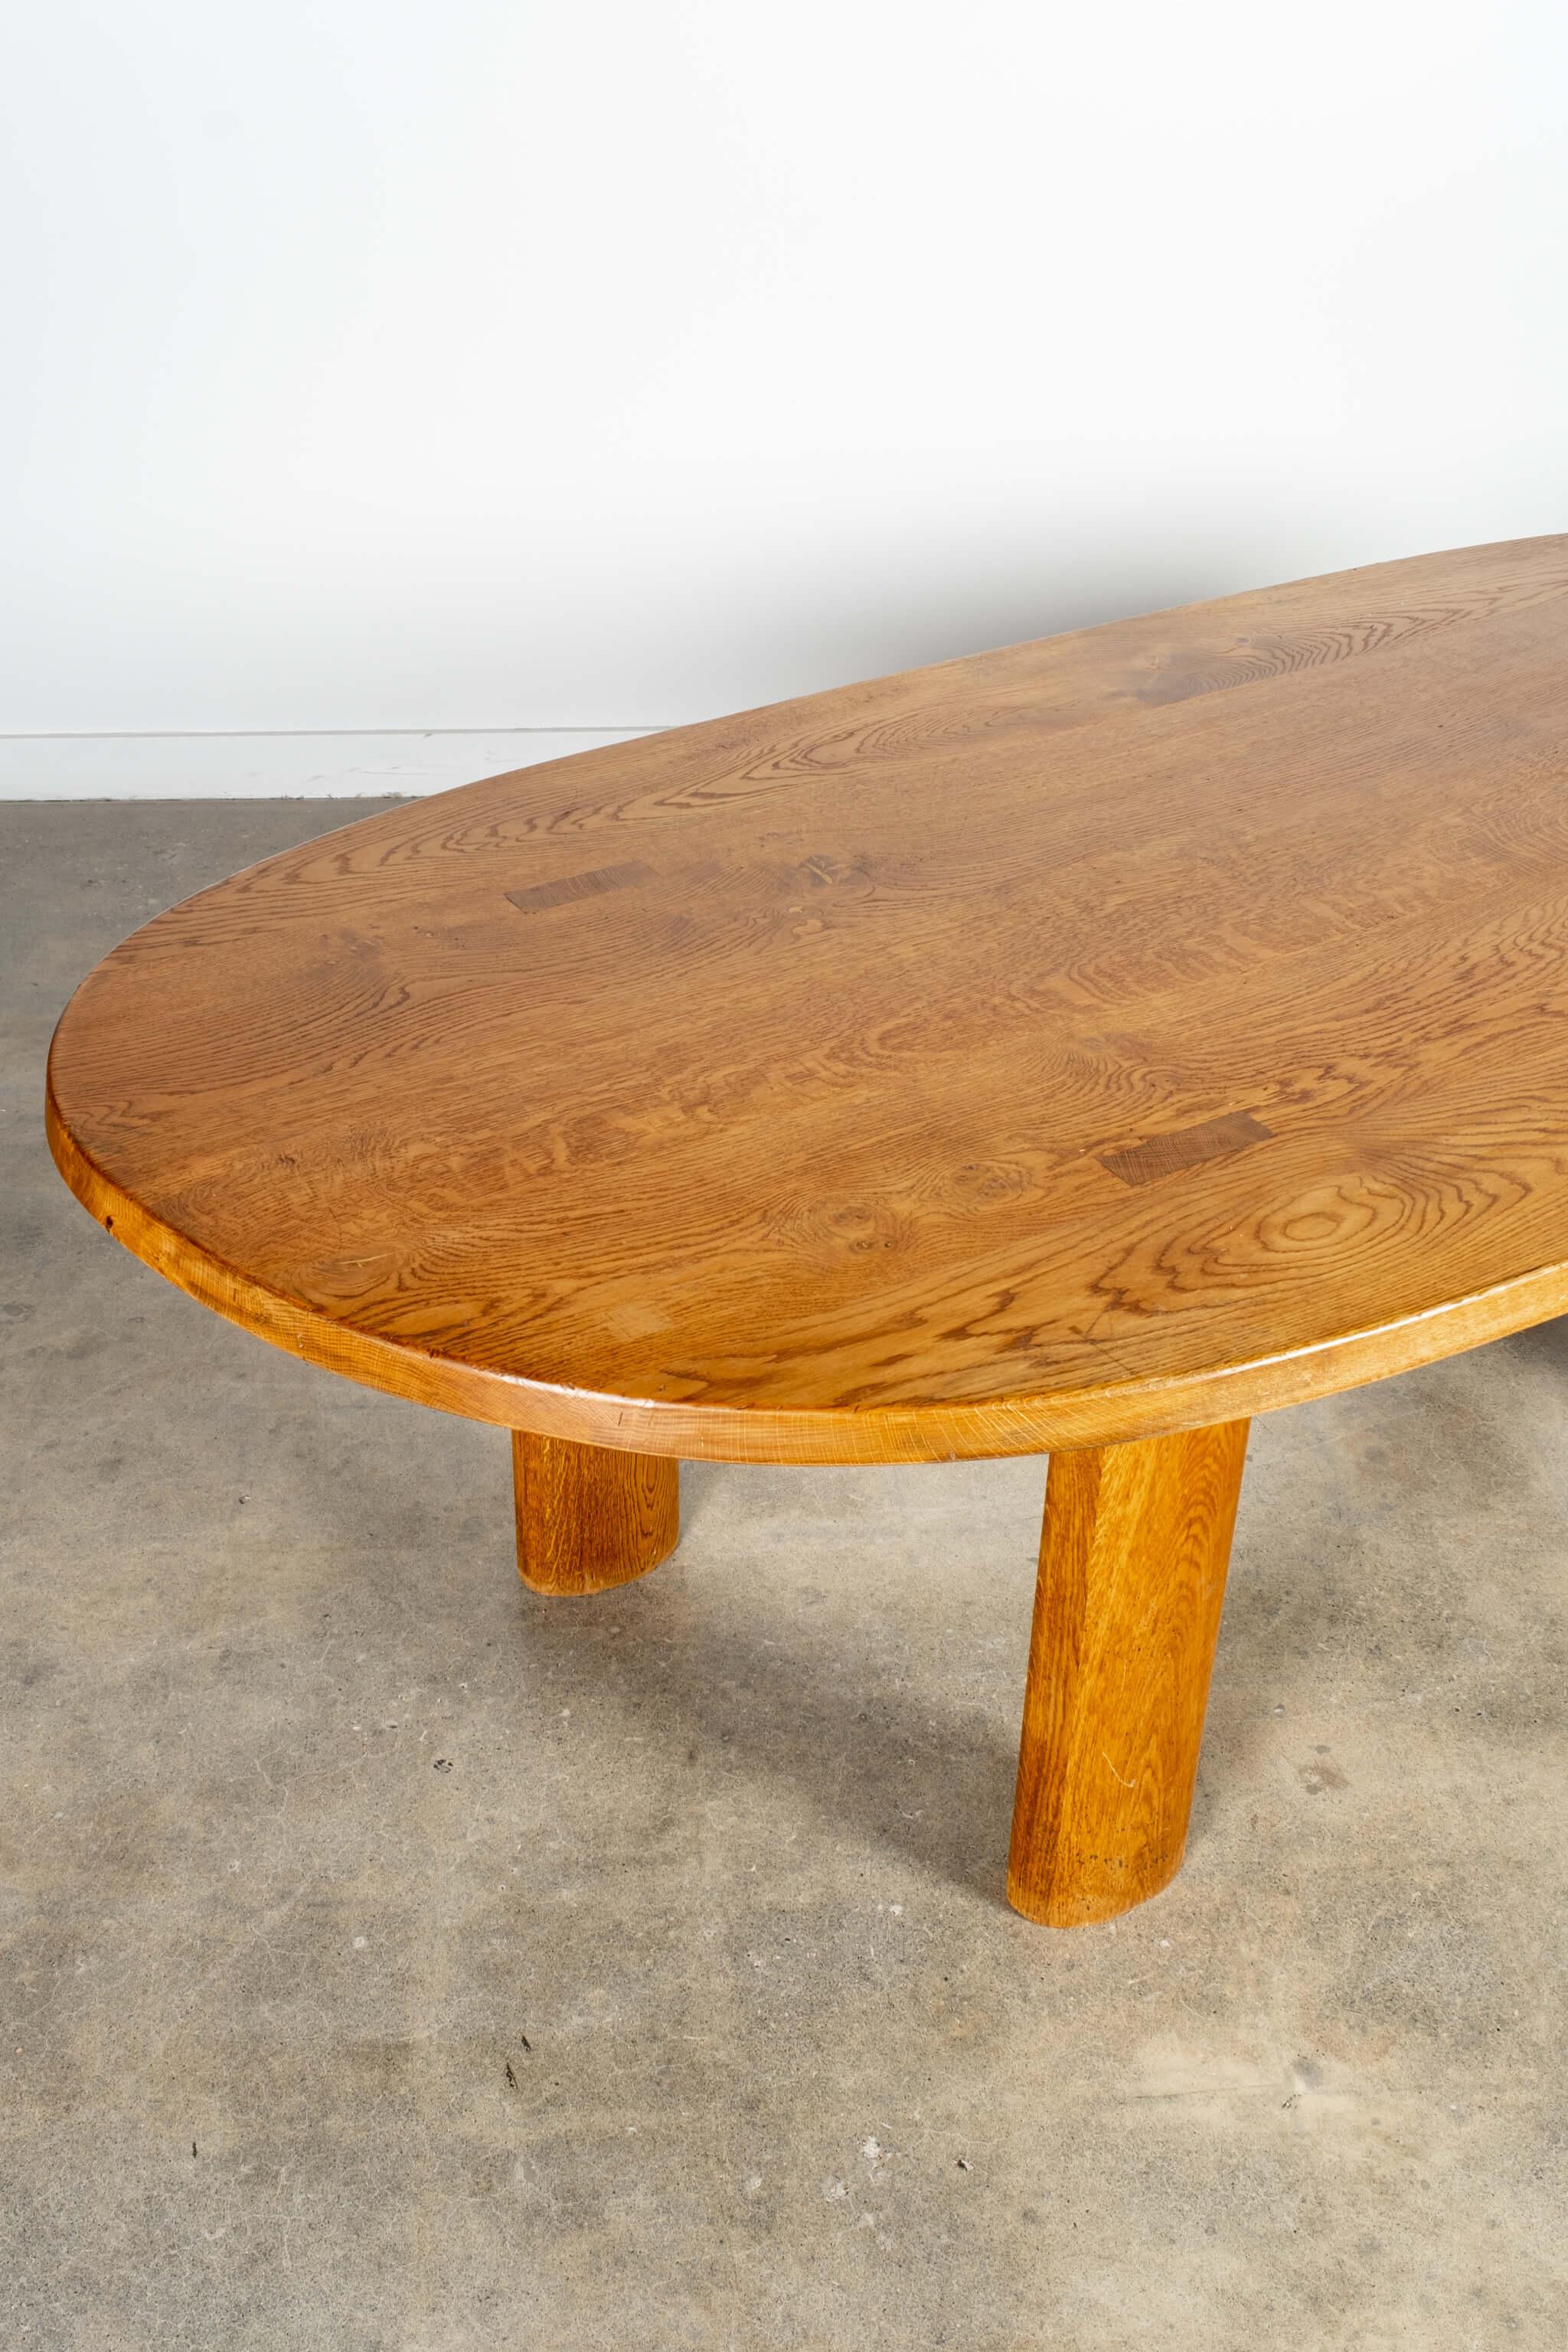 The 1950s Curved Wood Dining Table nach Charlotte Perriand (Holz) im Angebot